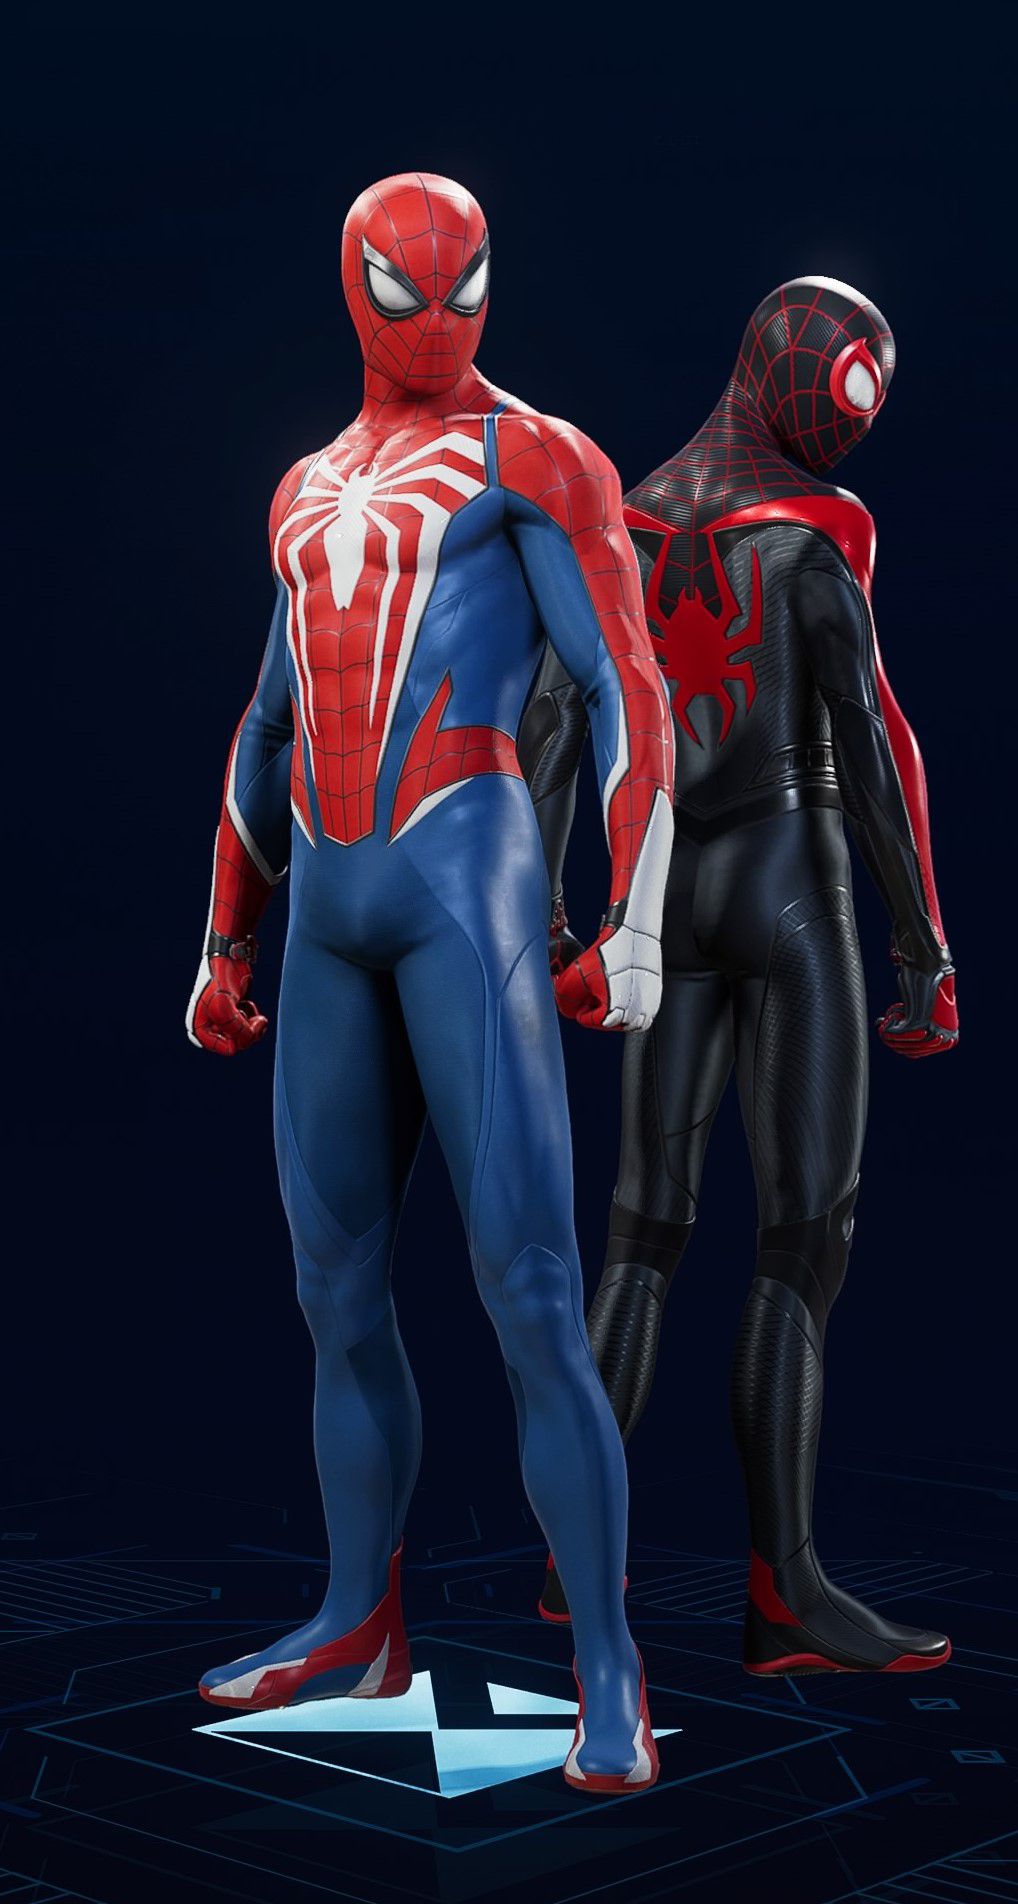 Peter Parker stands in his Advanced Suit 2.0 in the suit selection screen of Spider-Man 2.